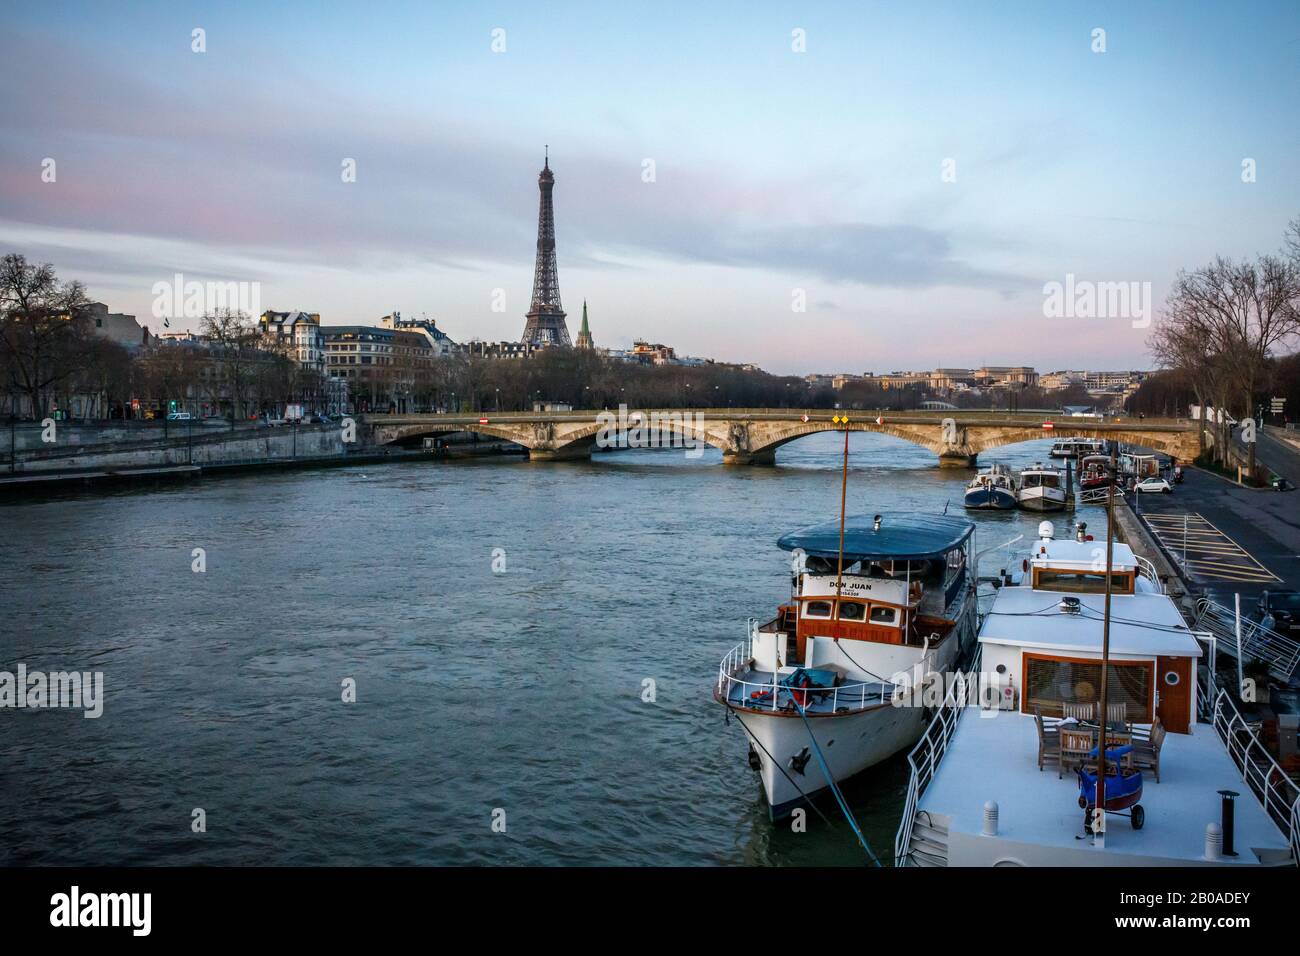 Bateaux mouches boats on the Seine near the Eiffel Tower in Paris. Stock Photo